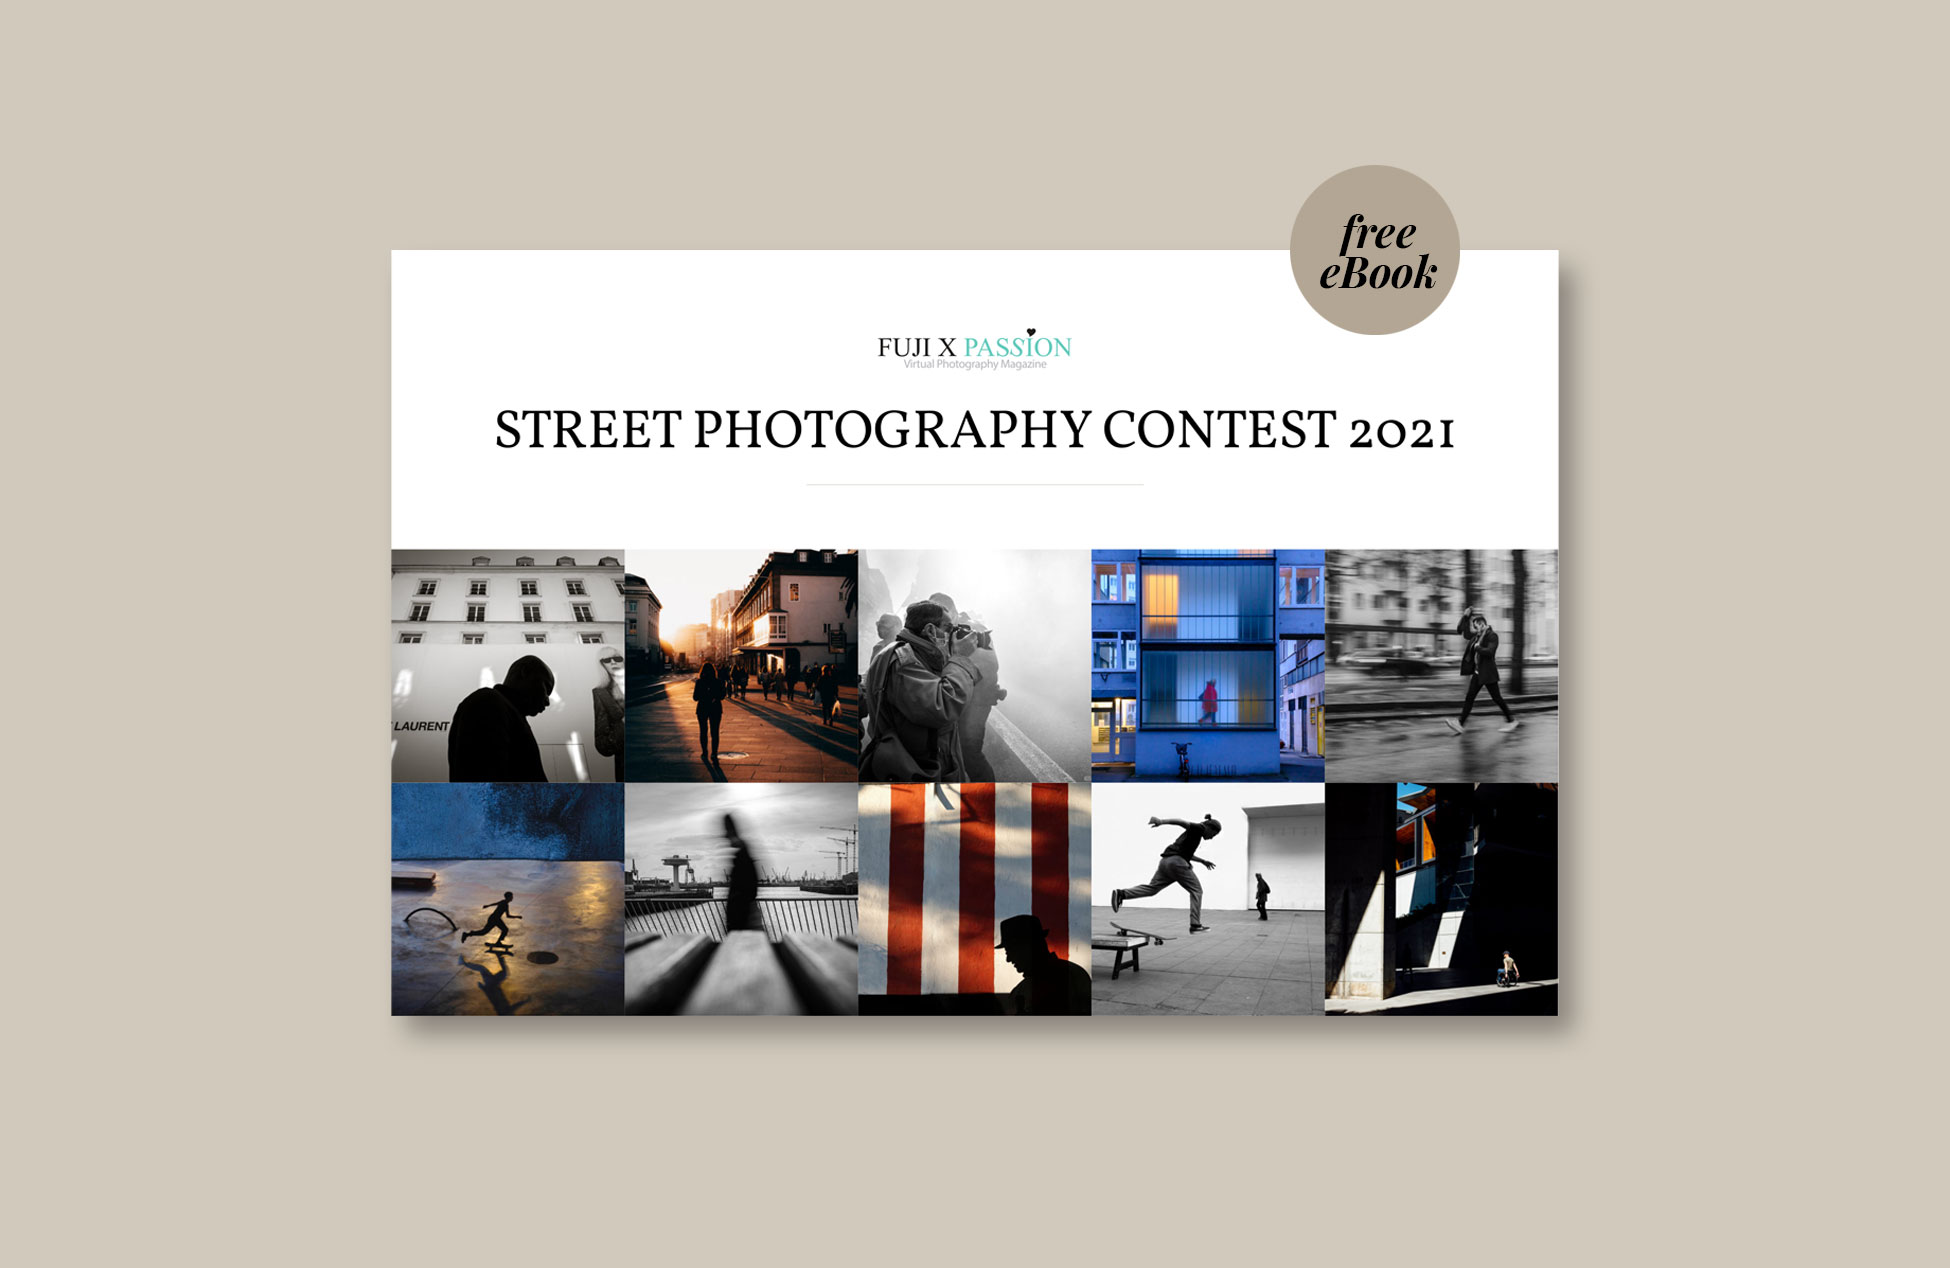 Street Photography Contest 2021 – Winners and Free eBook